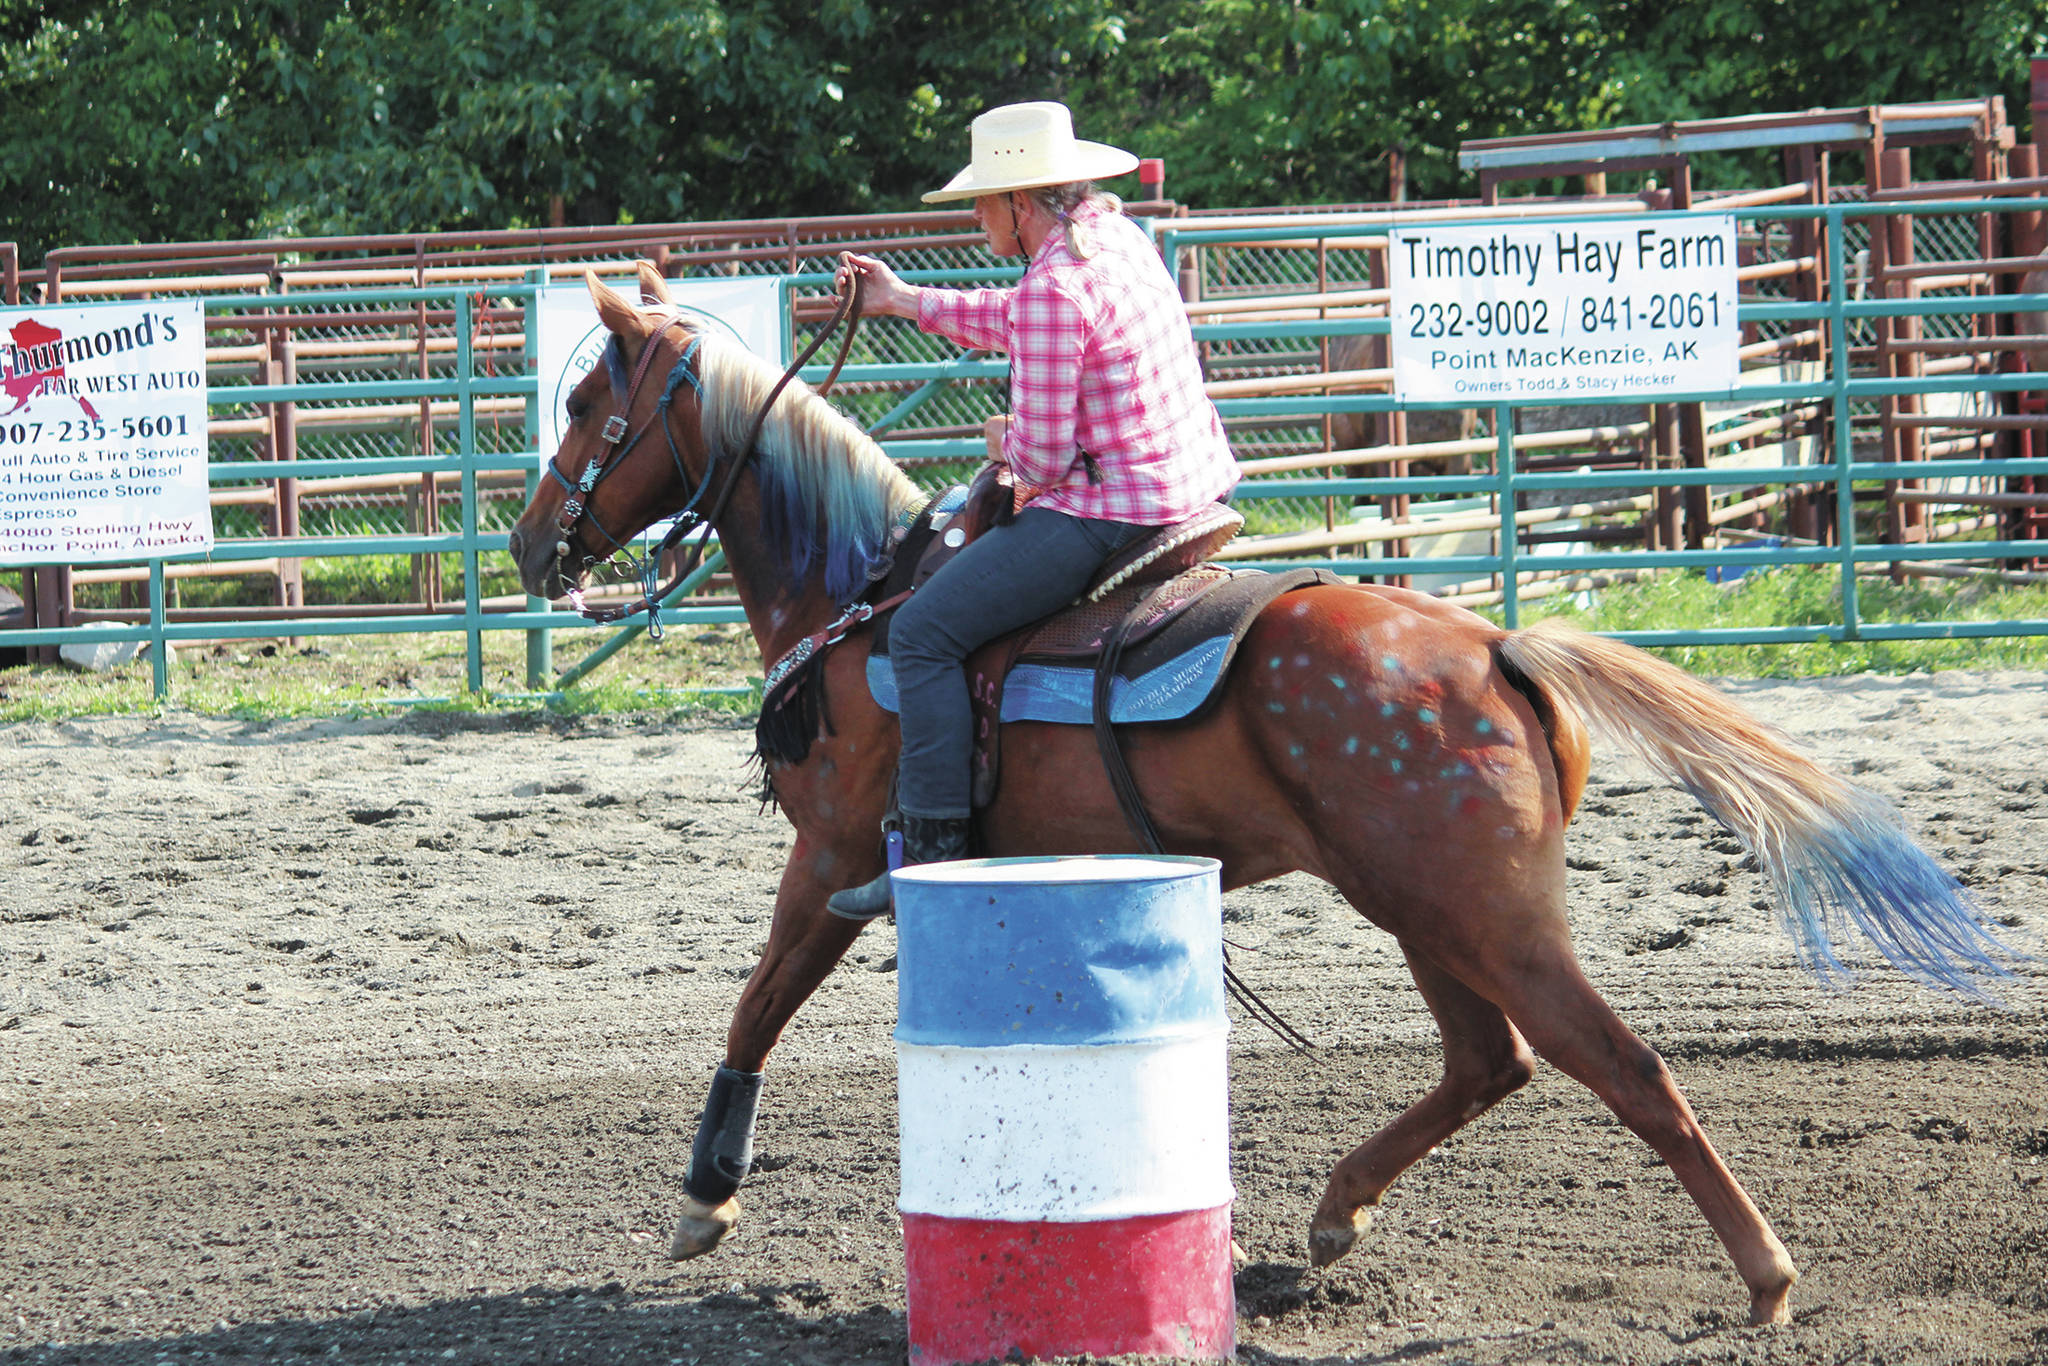 Naida McGee, of Anchorage, leads her horse through the barrel race at this year’s Ninilchik Rodeo on Saturday, July 4, 2020 at the Kenai Peninsula Fairgrounds in Ninilchik, Alaska. (Photo by Megan Pacer/Homer News)